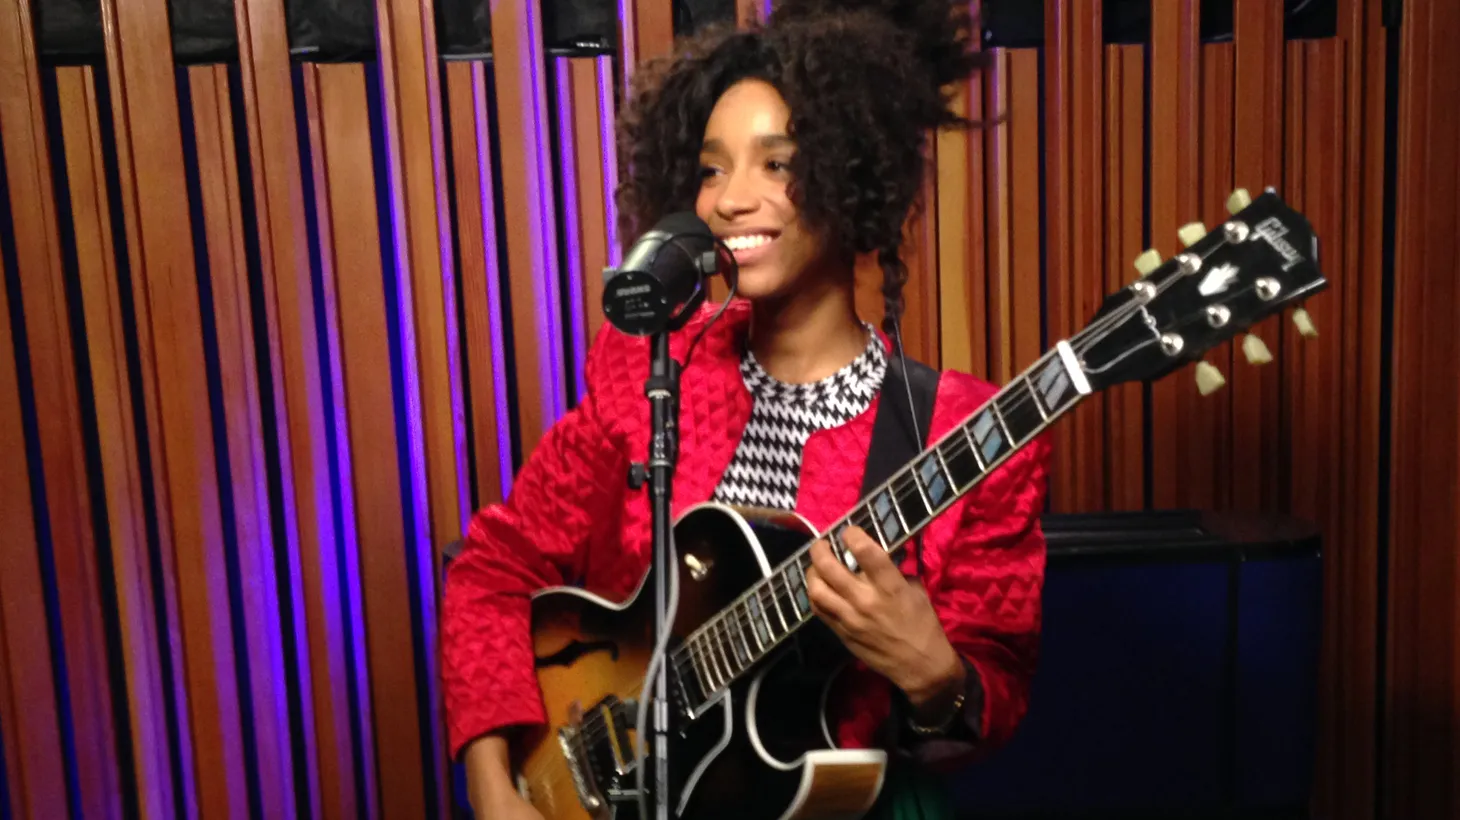 Lianne La Havas is a powerhouse performer with uplifting, soulful pop songs that are playful yet intimate. She's engaging on every level and full of heart.